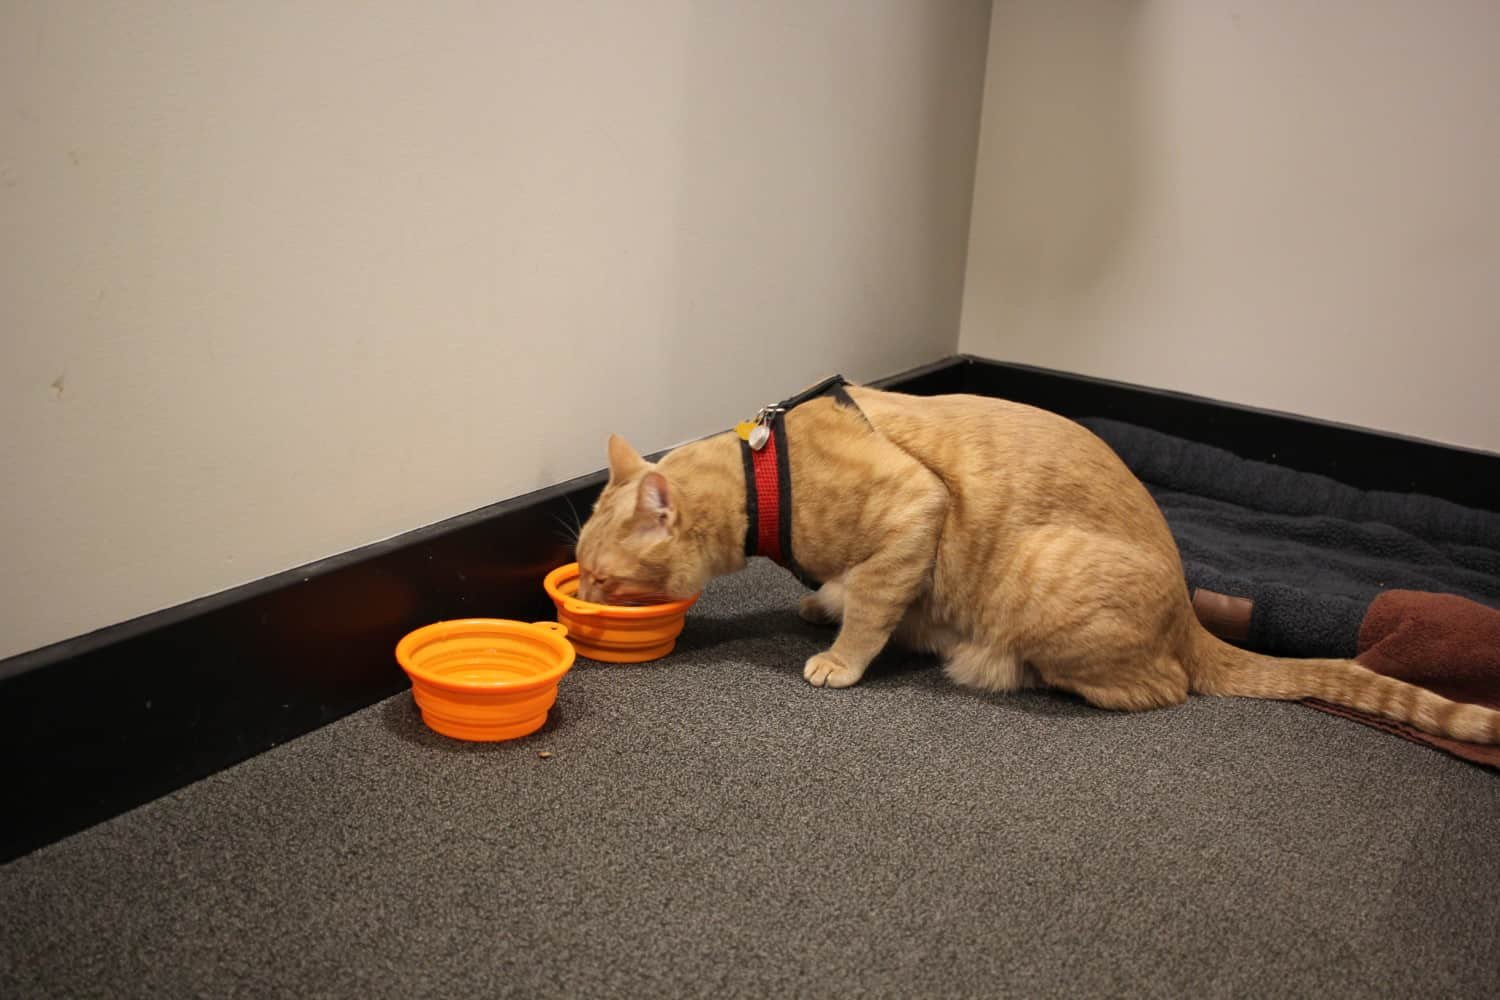 Fish the cat drinking from a collapsible bowl in a hotel room